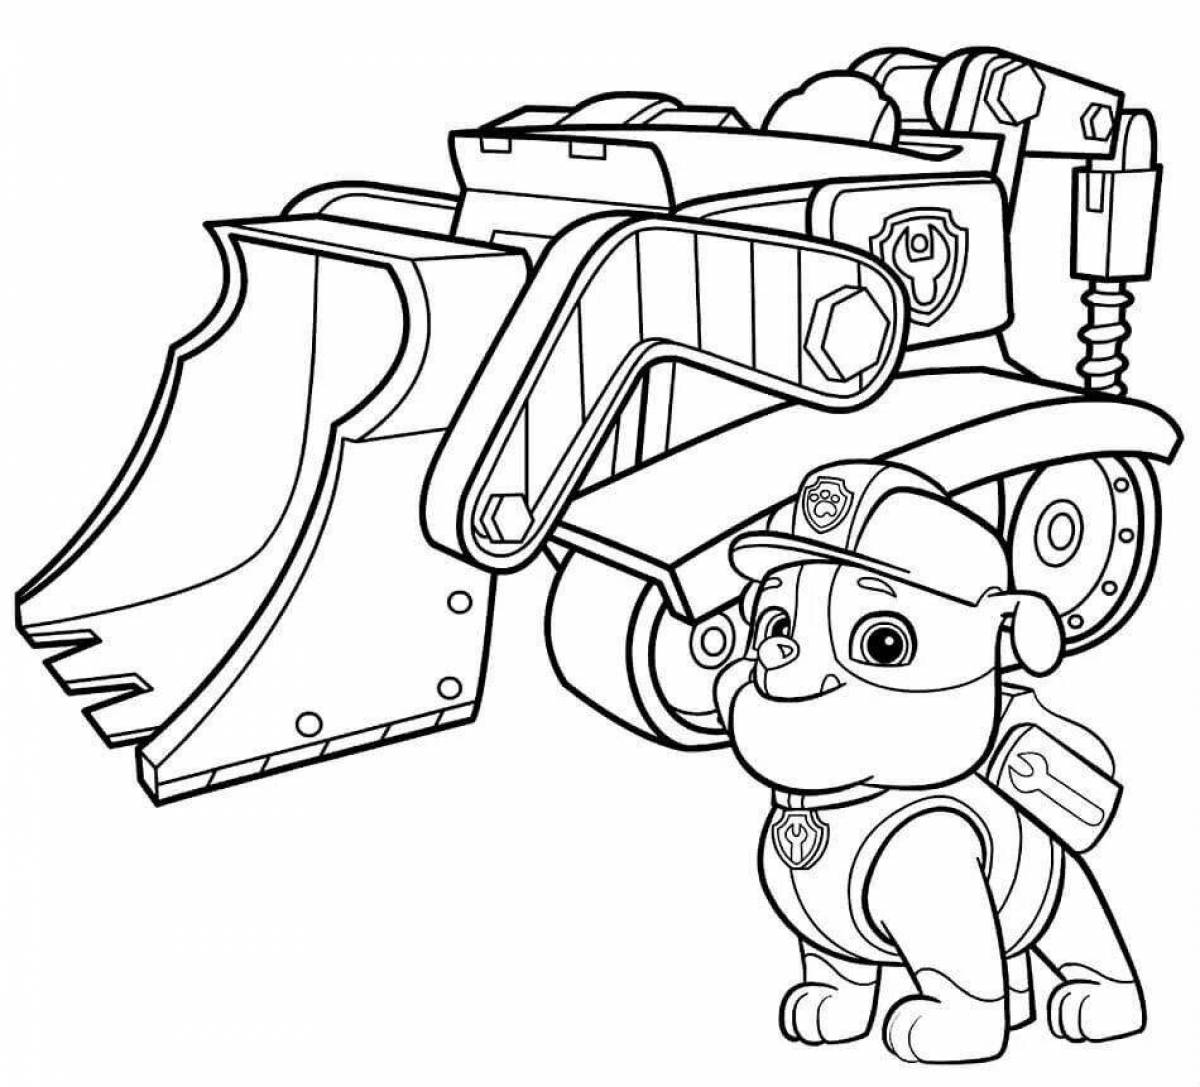 Paw patrol coloring book for 5 year olds